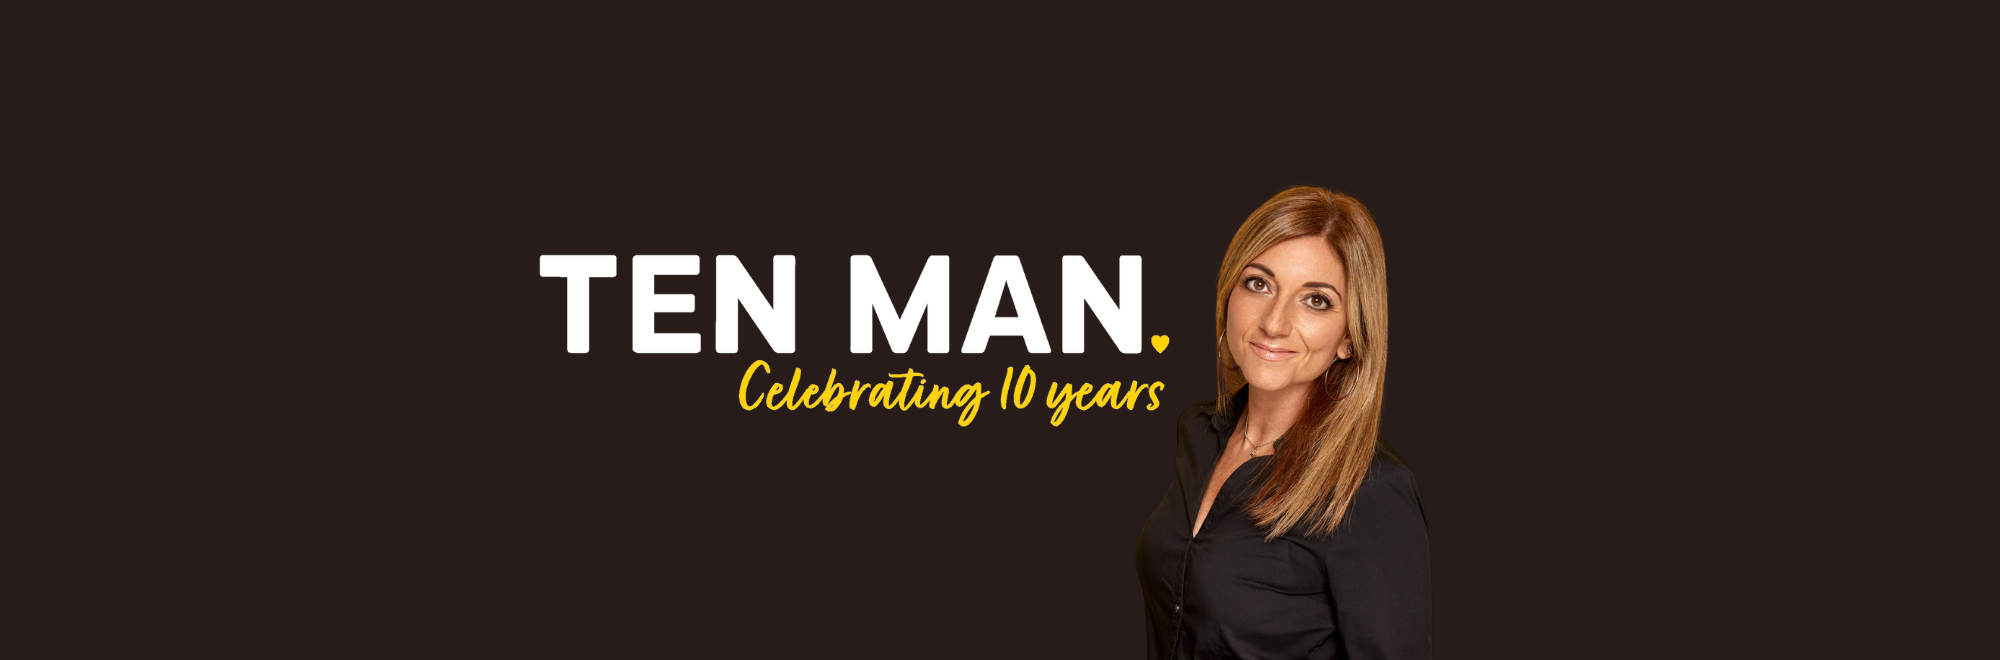 10 years, 10 mistakes, 10 lessons by Mandy Sharp, CEO and founder, Tin Man